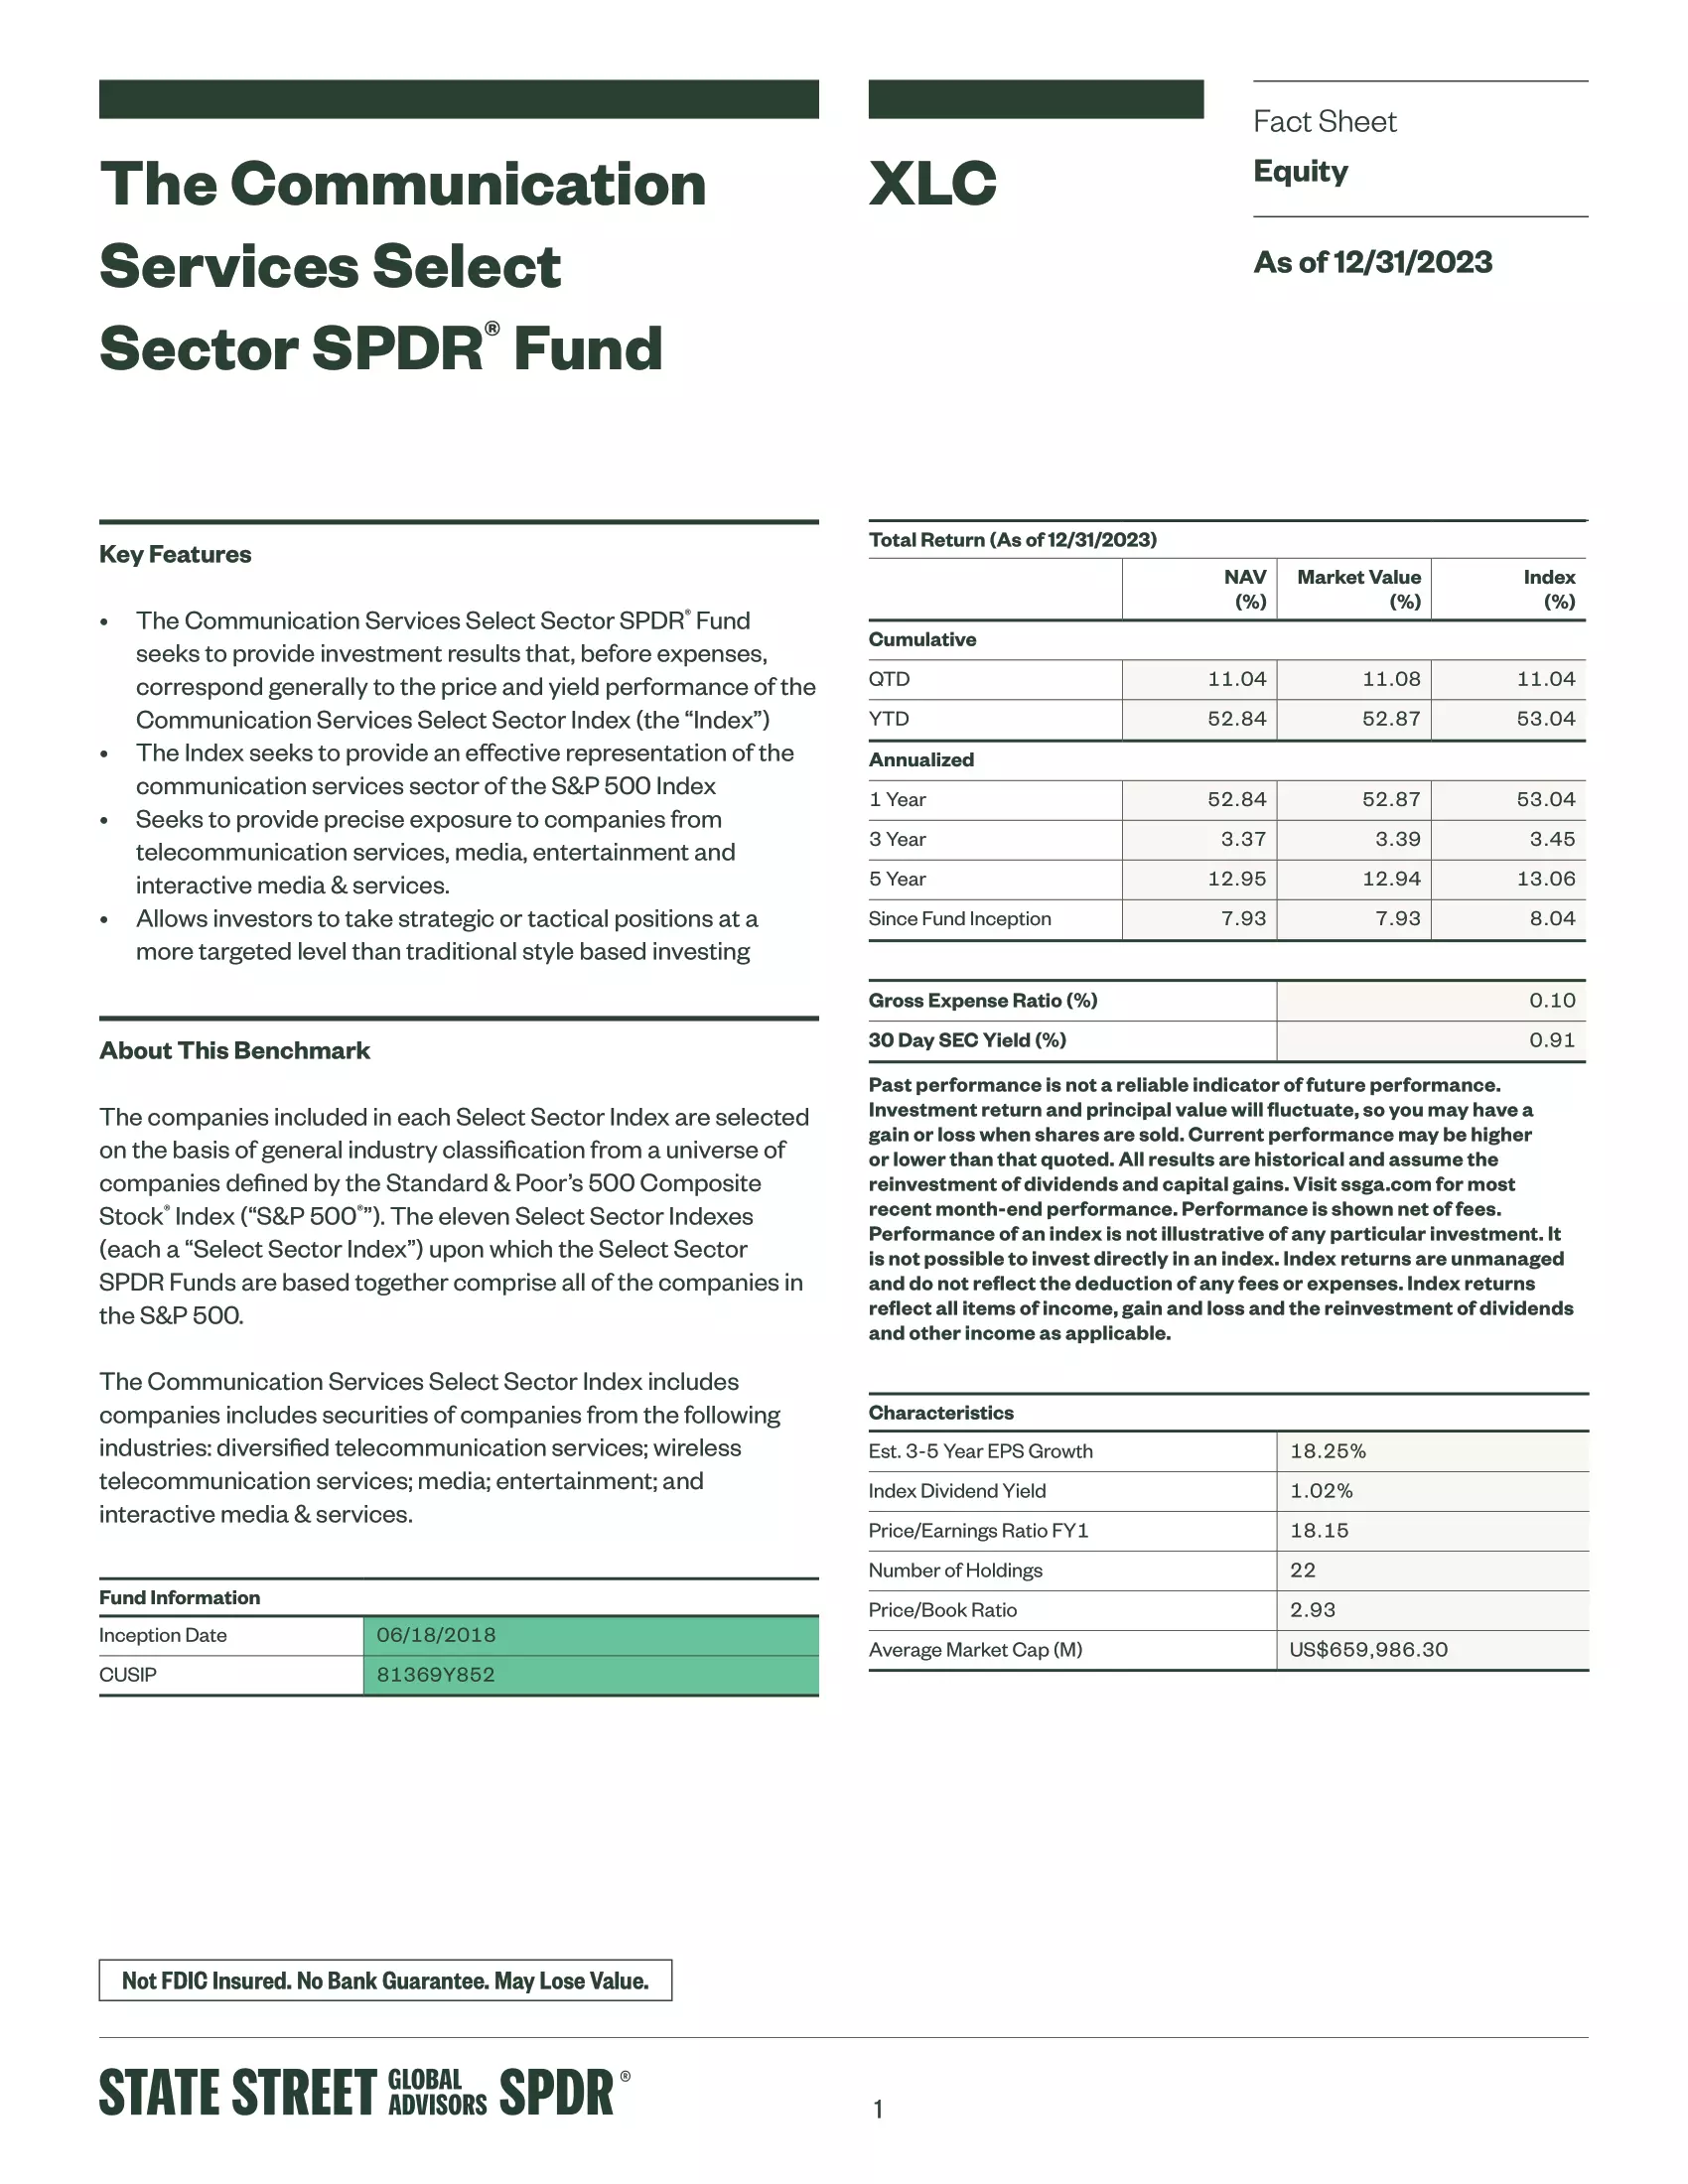 XLC: Communication Services Select Sector SPDR Fund